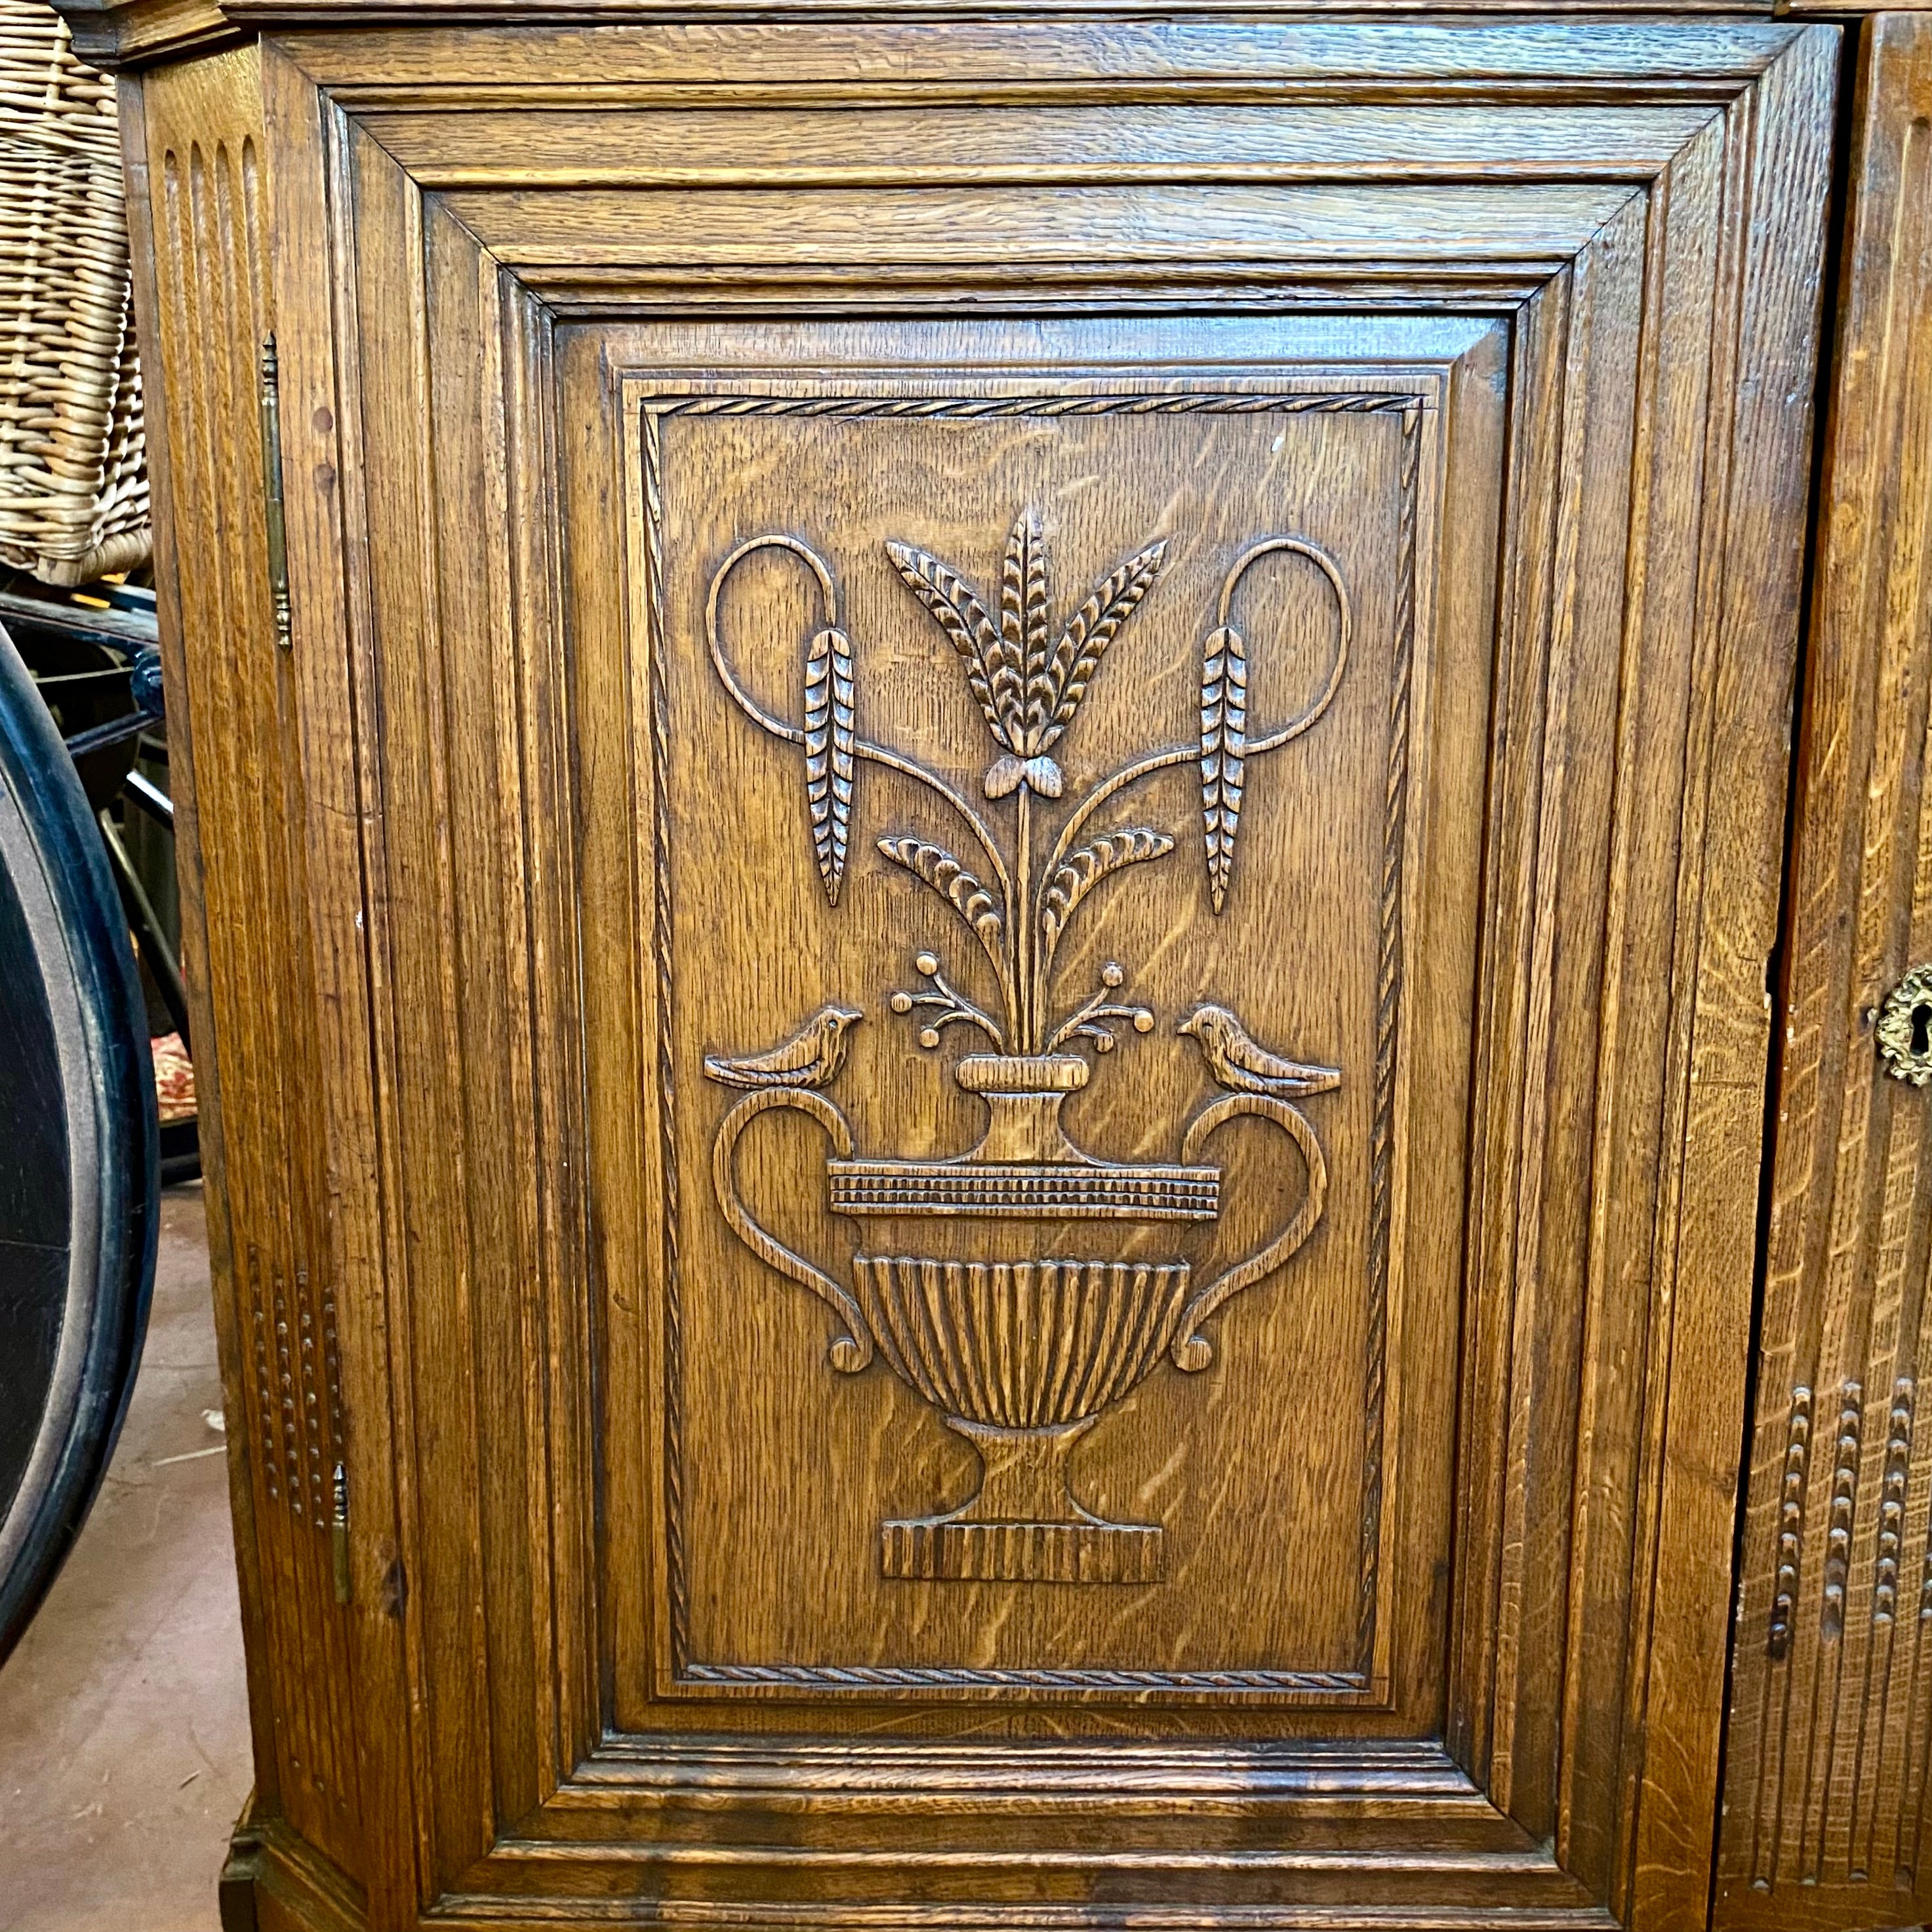 Antique Carved Oak Cabinet with Brass Fixtures